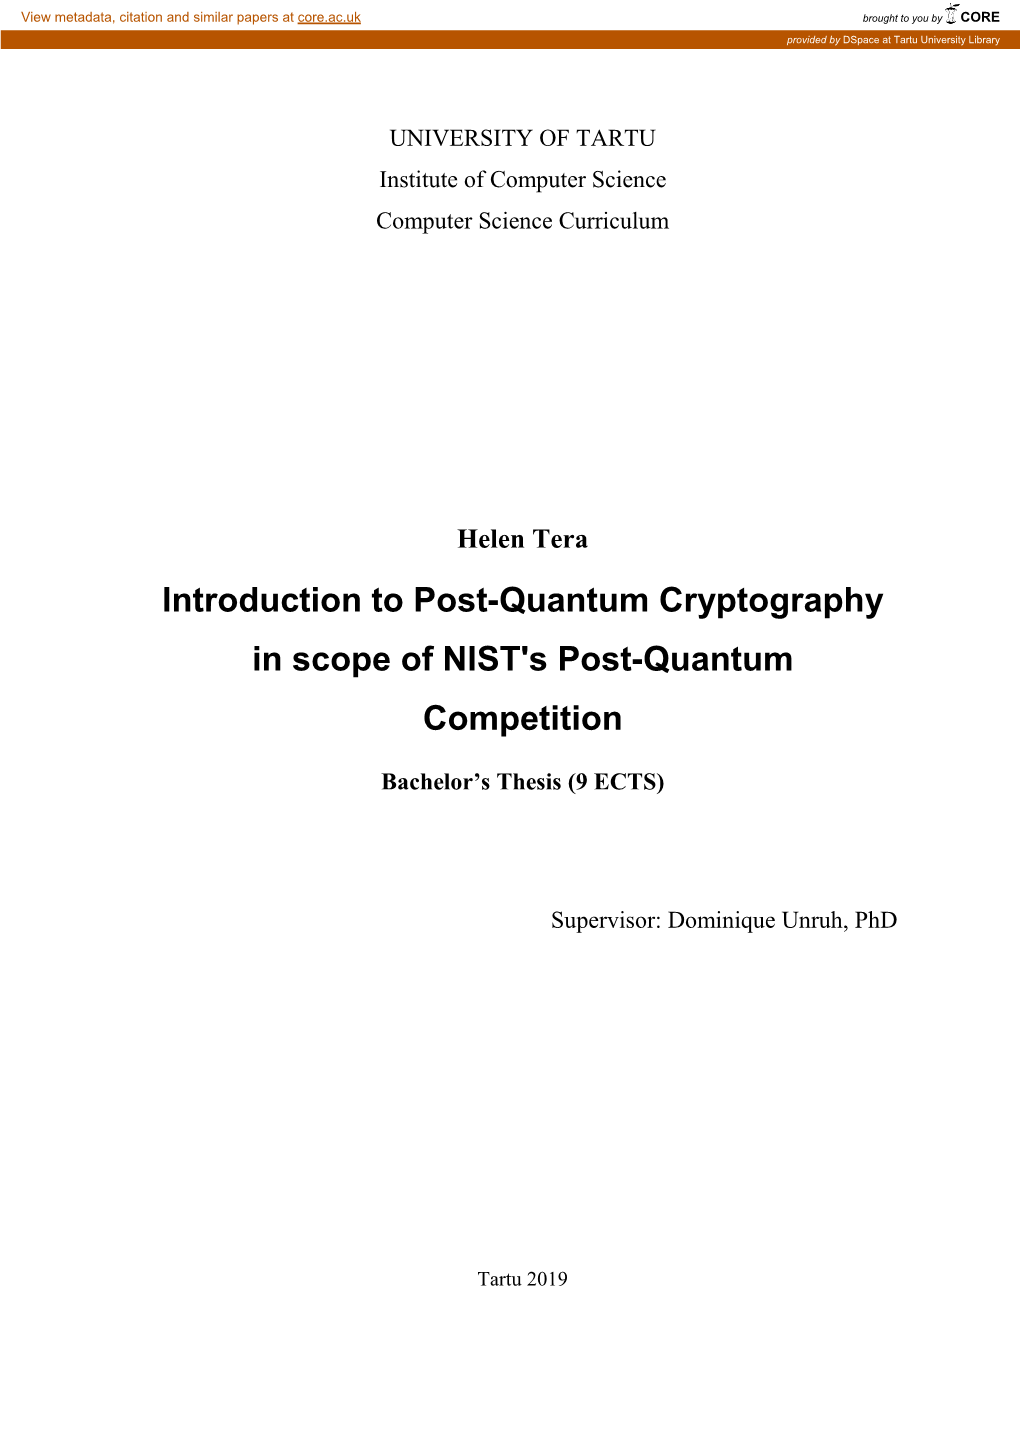 Introduction to Post-Quantum Cryptography in Scope of NIST's Post-Quantum Competition